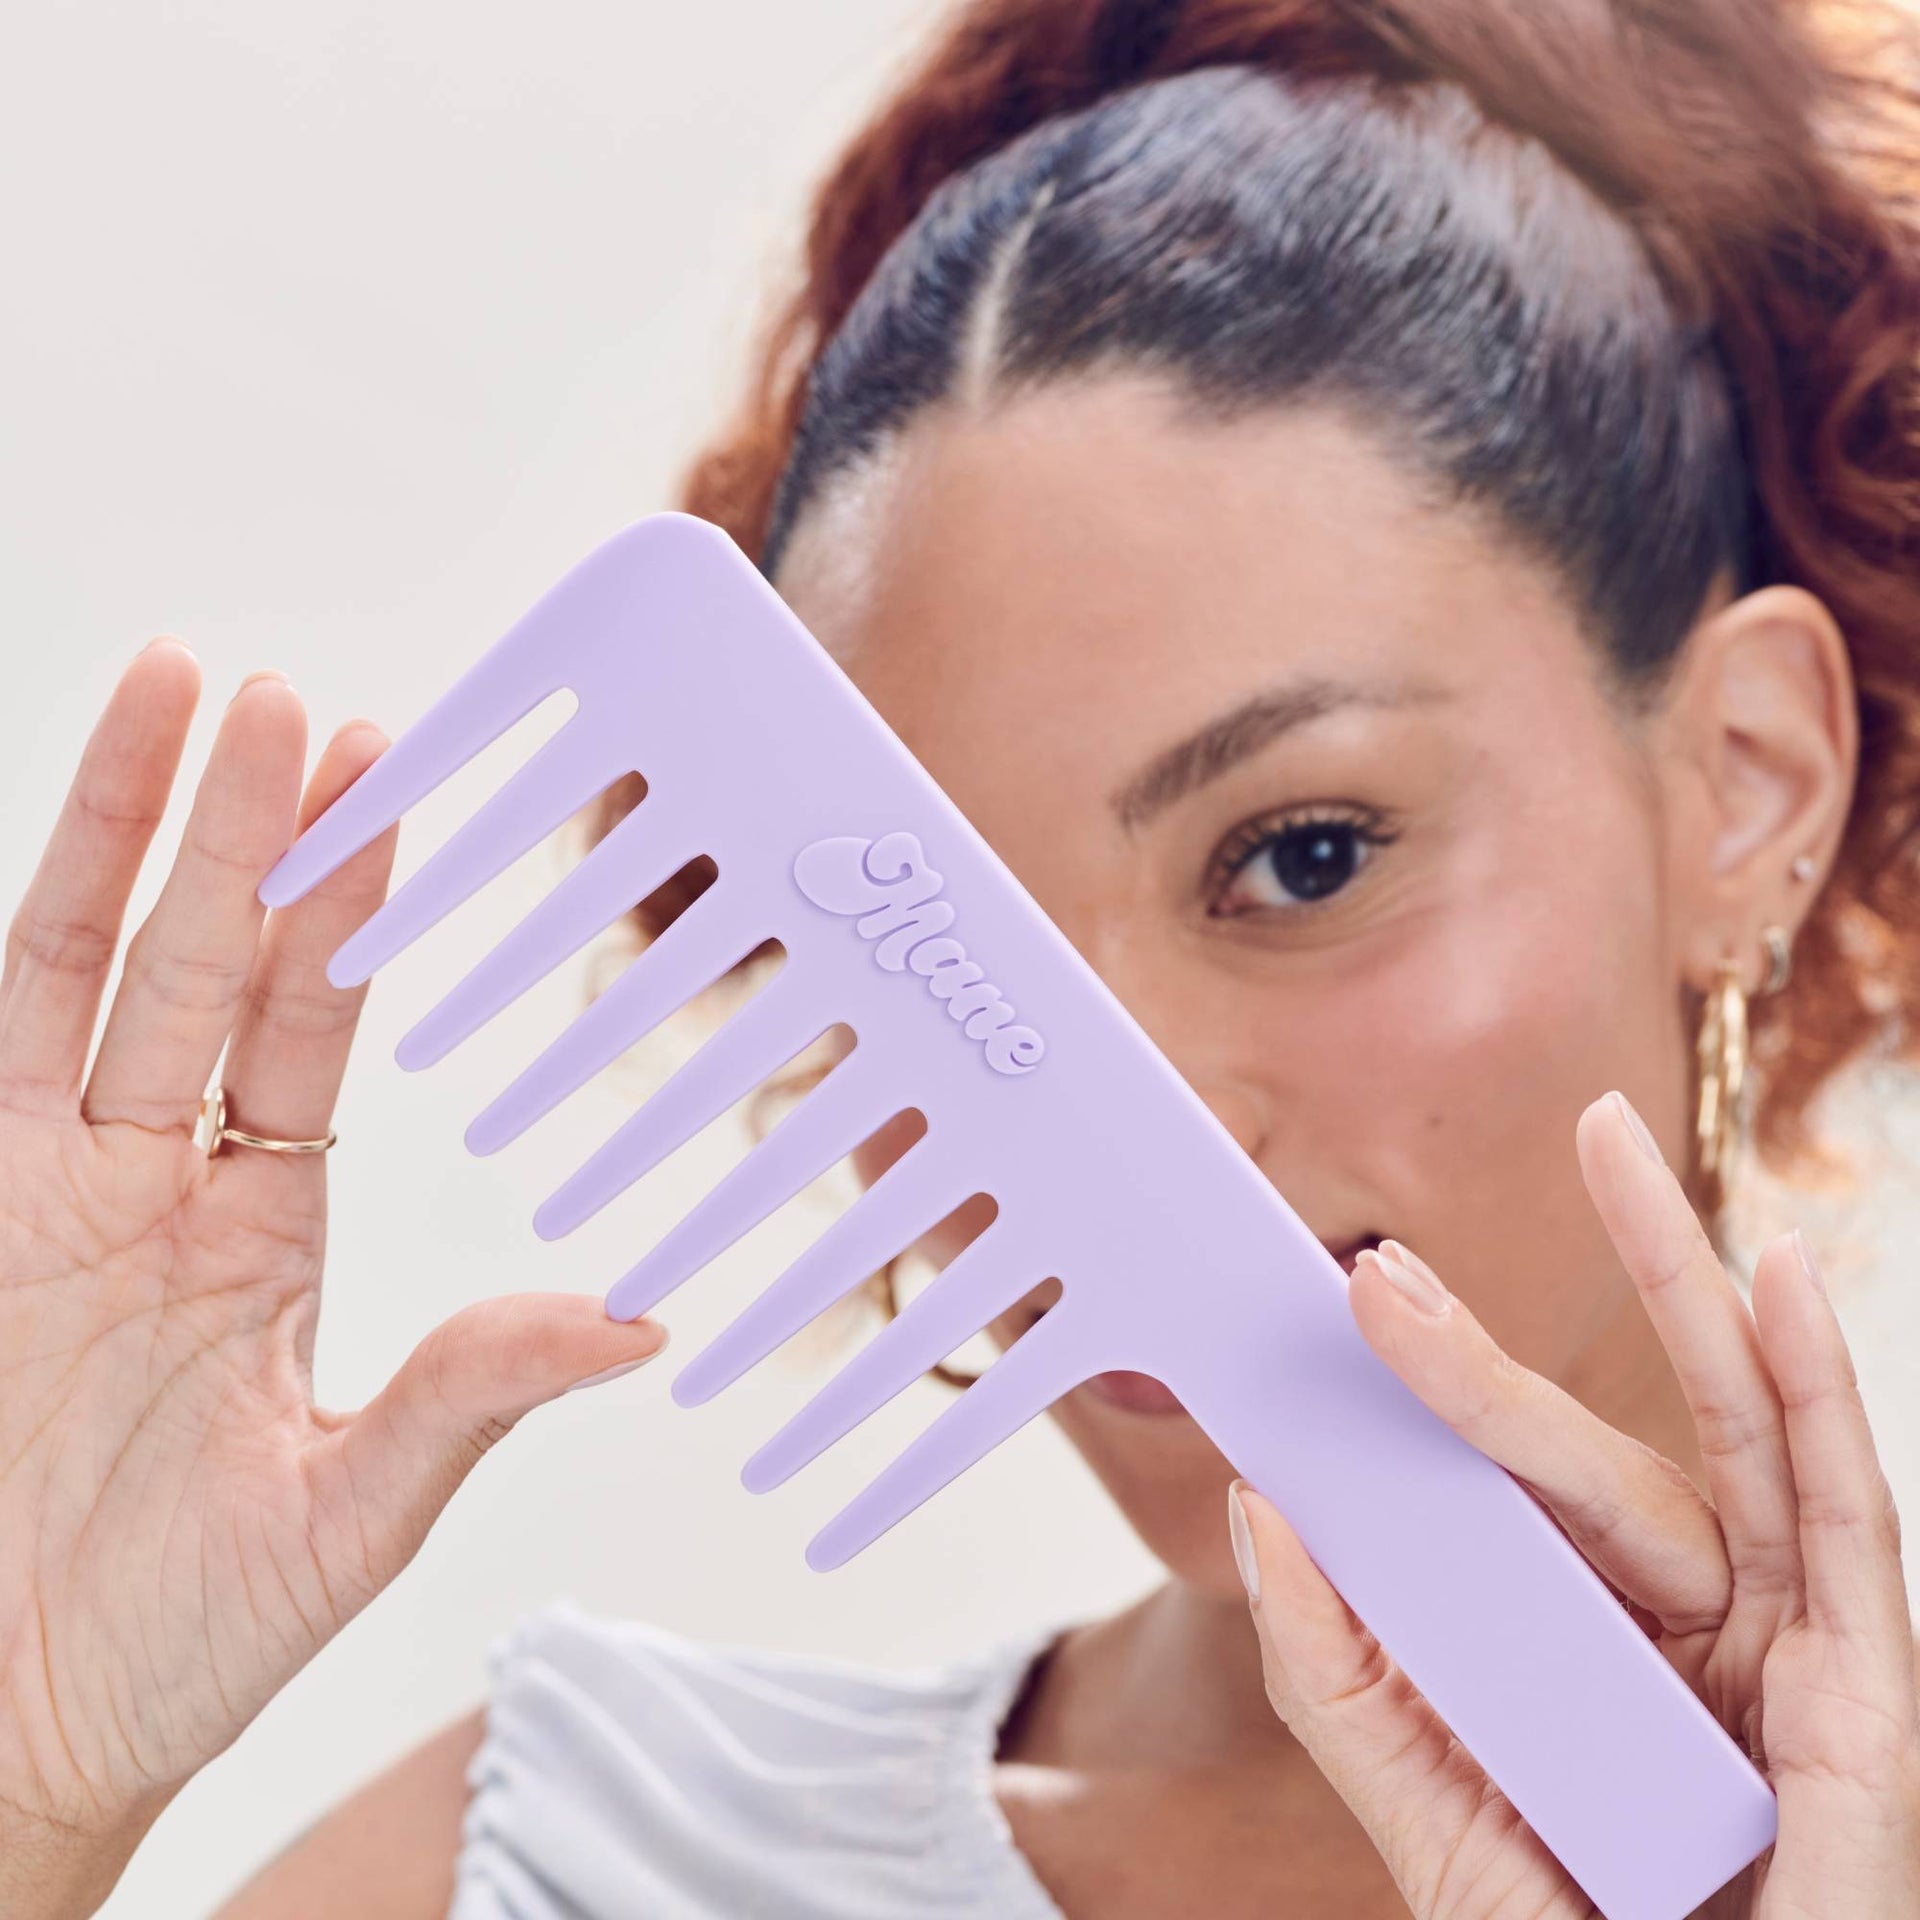 mane by jen atkin not ur average wide-tooth comb in purple with model